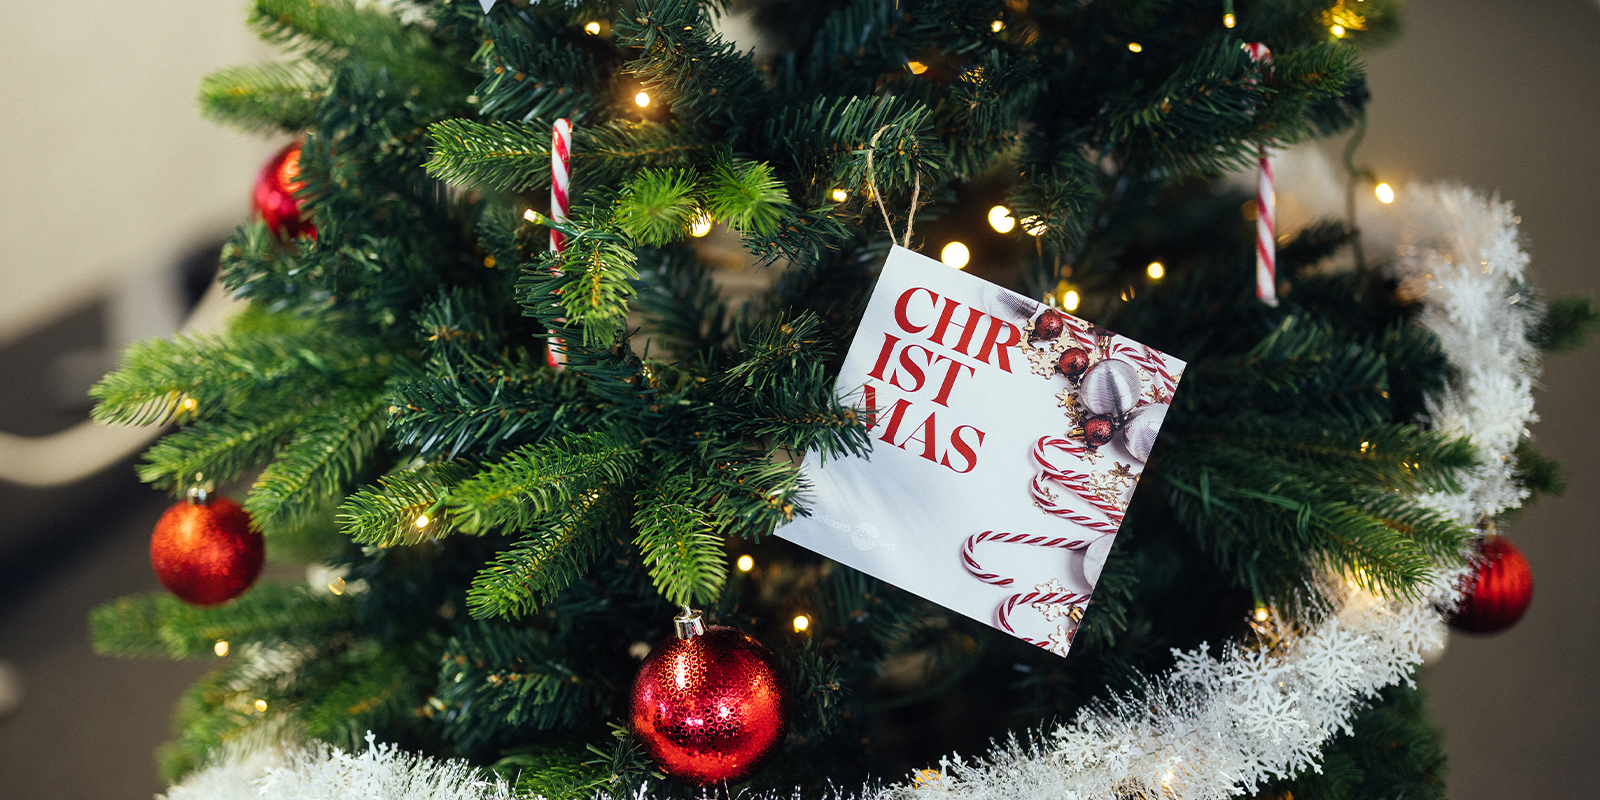 Delicard® Christmas gift card hanging in a Christmas tree